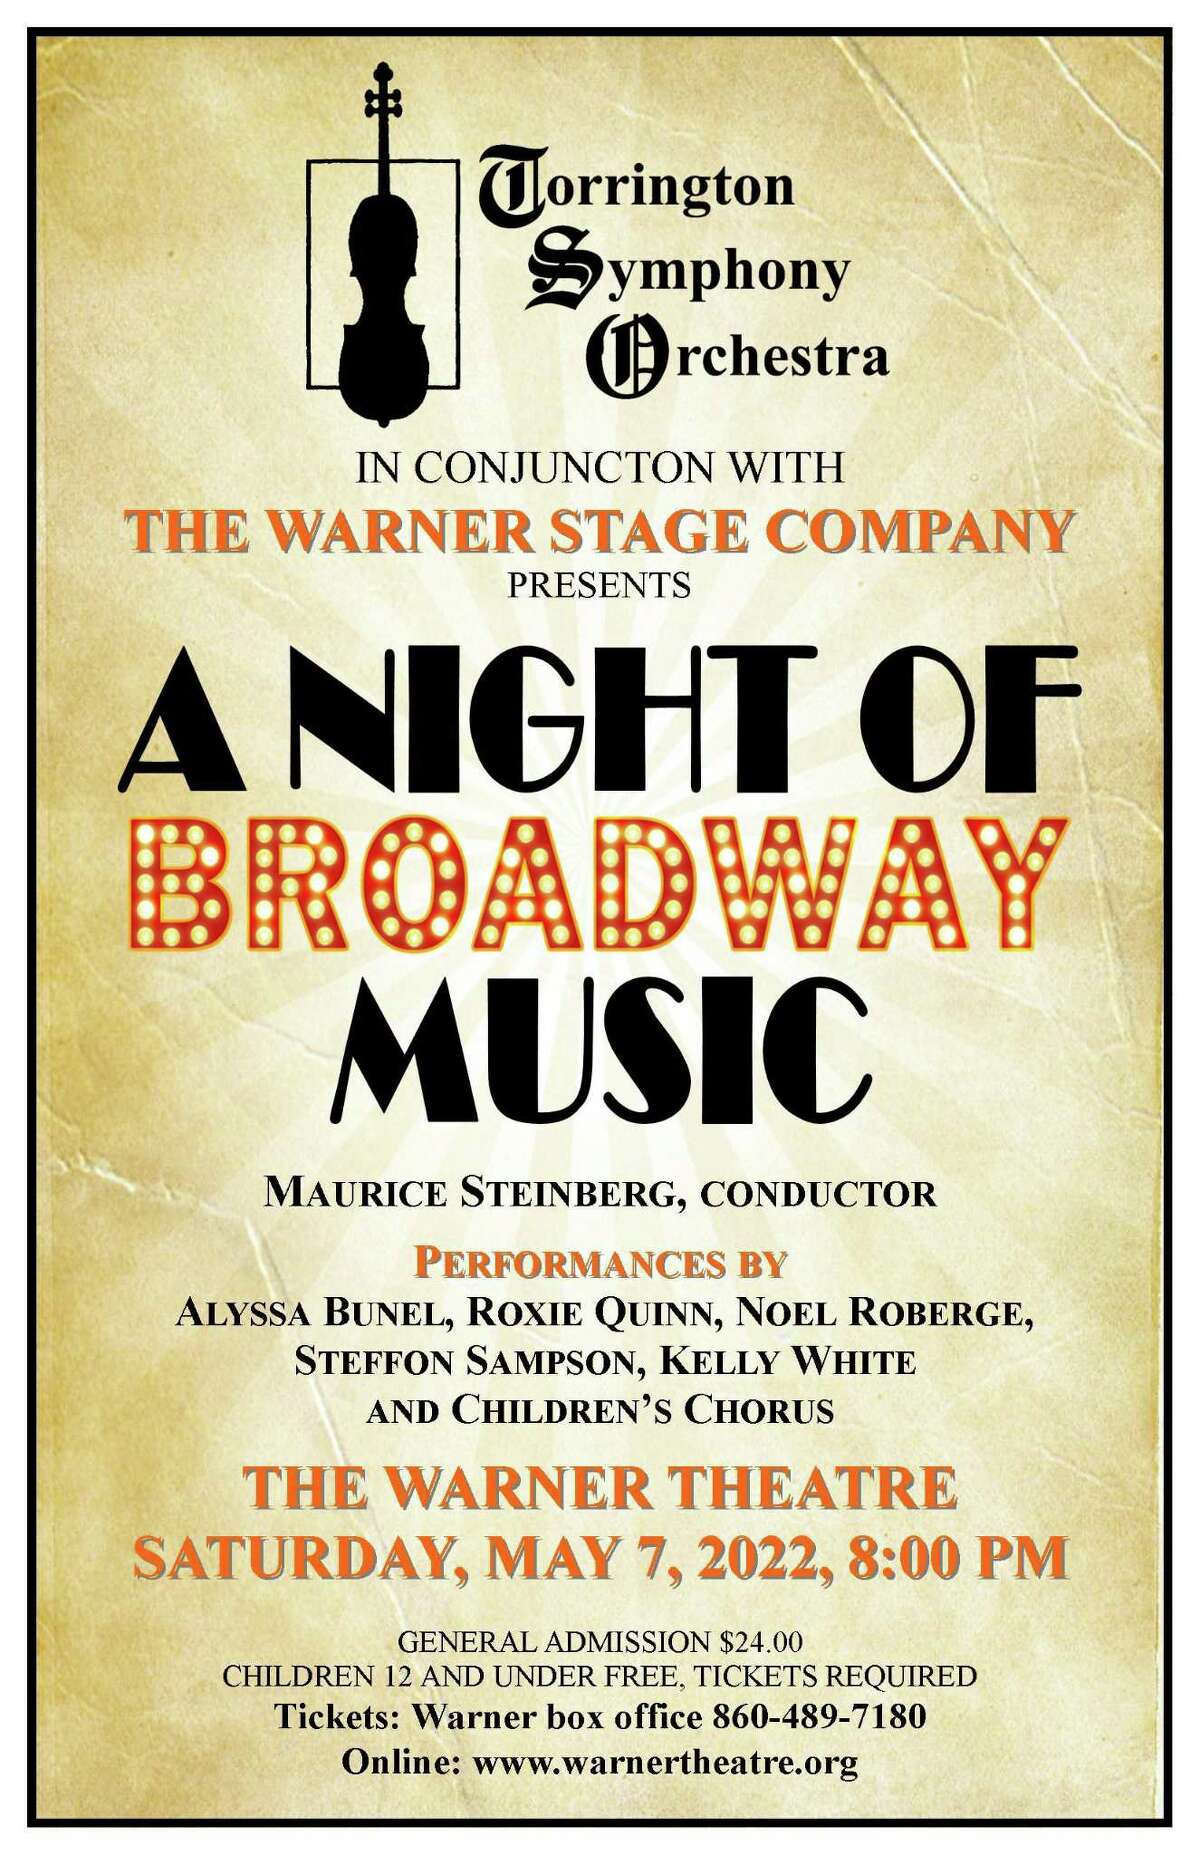 The Torrington Symphony Orchestra will present “A Night Of Broadway Music,” in conjunction with the Warner Theatre’s own Warner Stage Company, at 8 p.m. May 7 in the Main Theatre